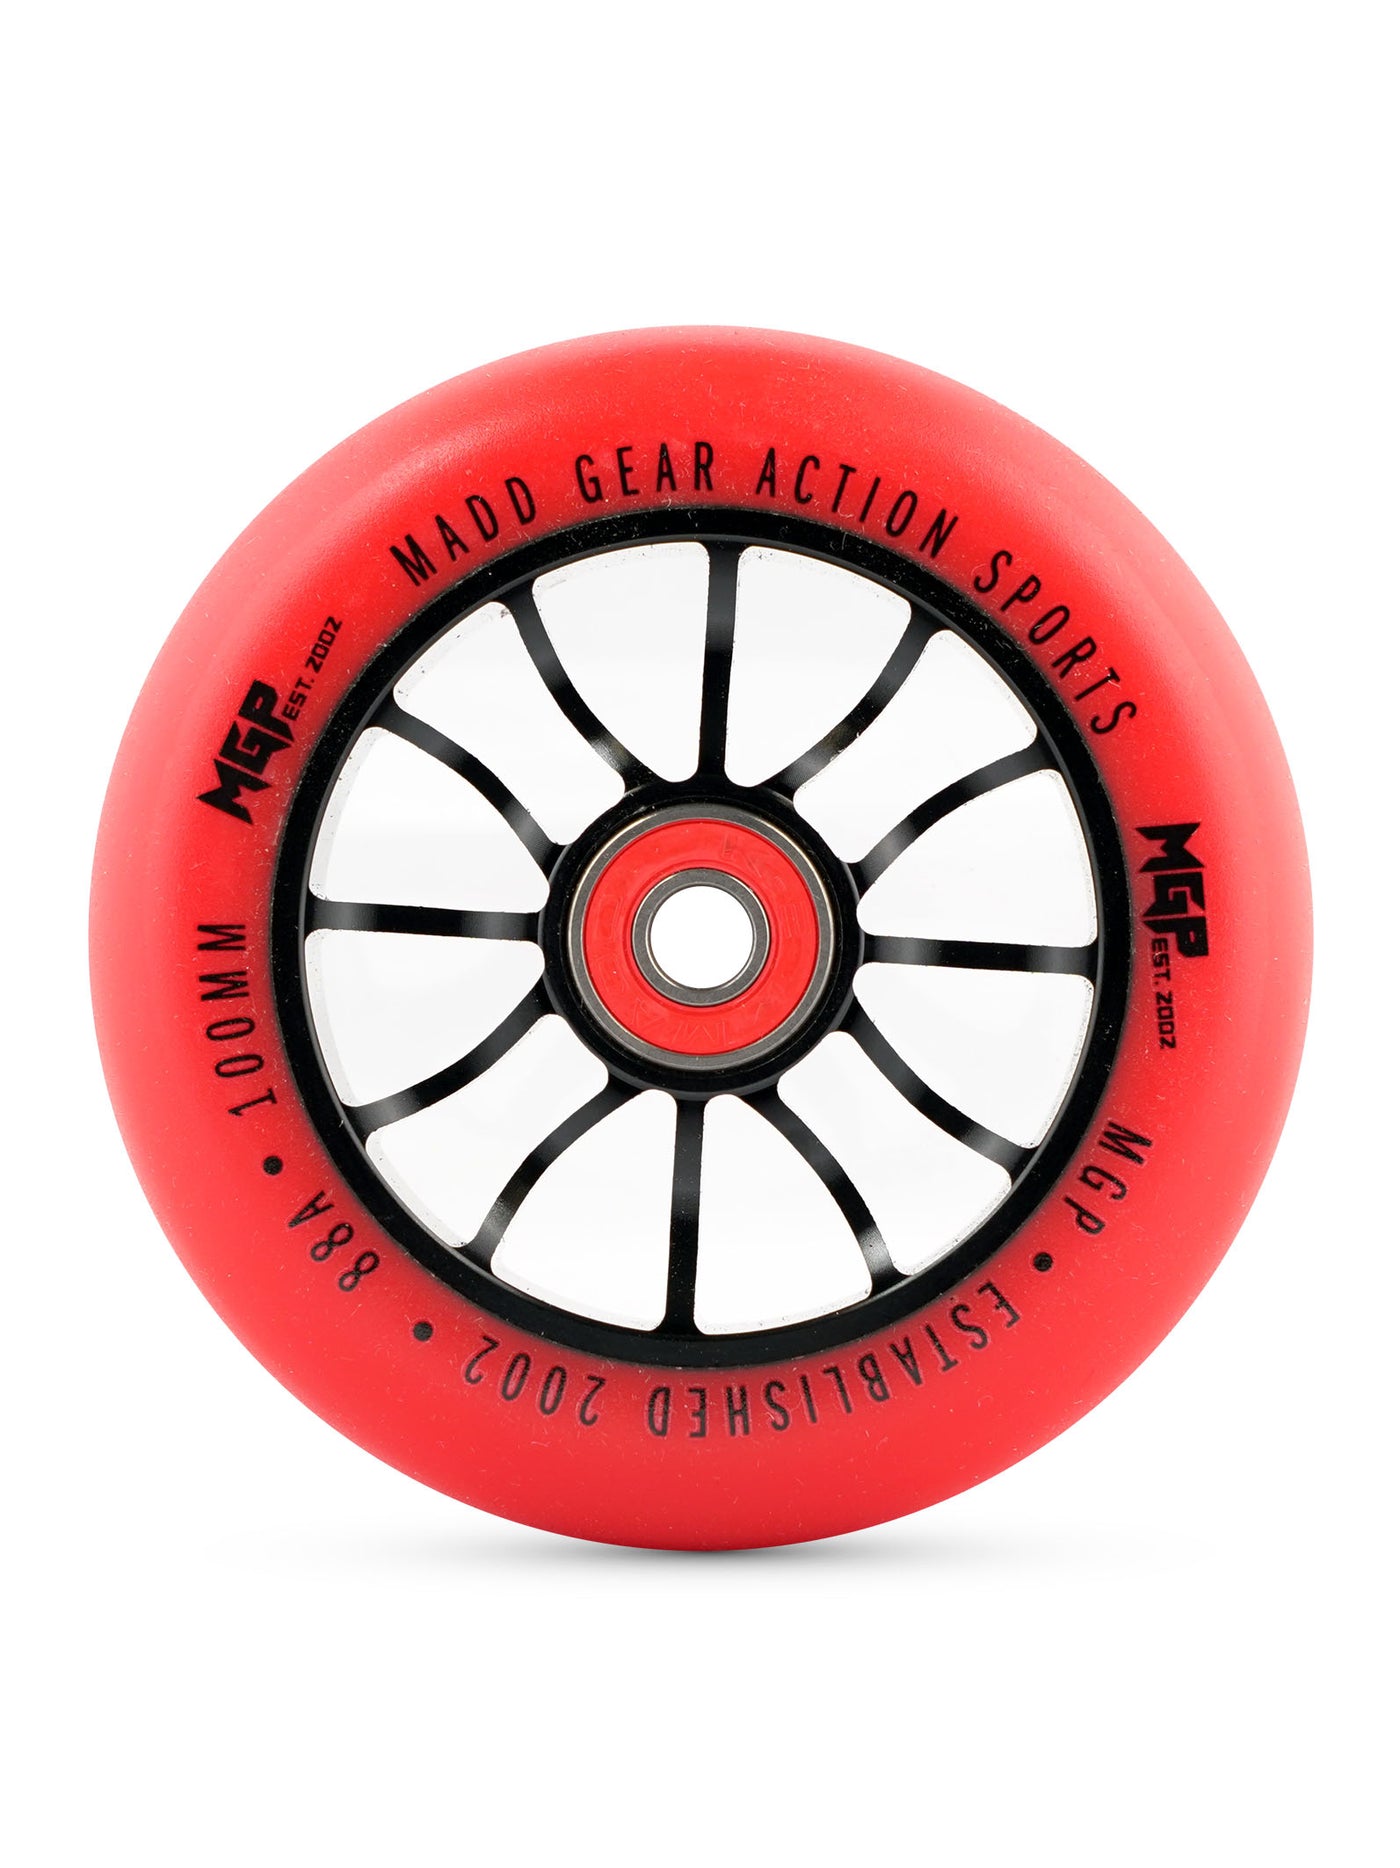 mfx madd gear mgp pro scooter wheel stunt trick alloy metal core replacement abec-9 red